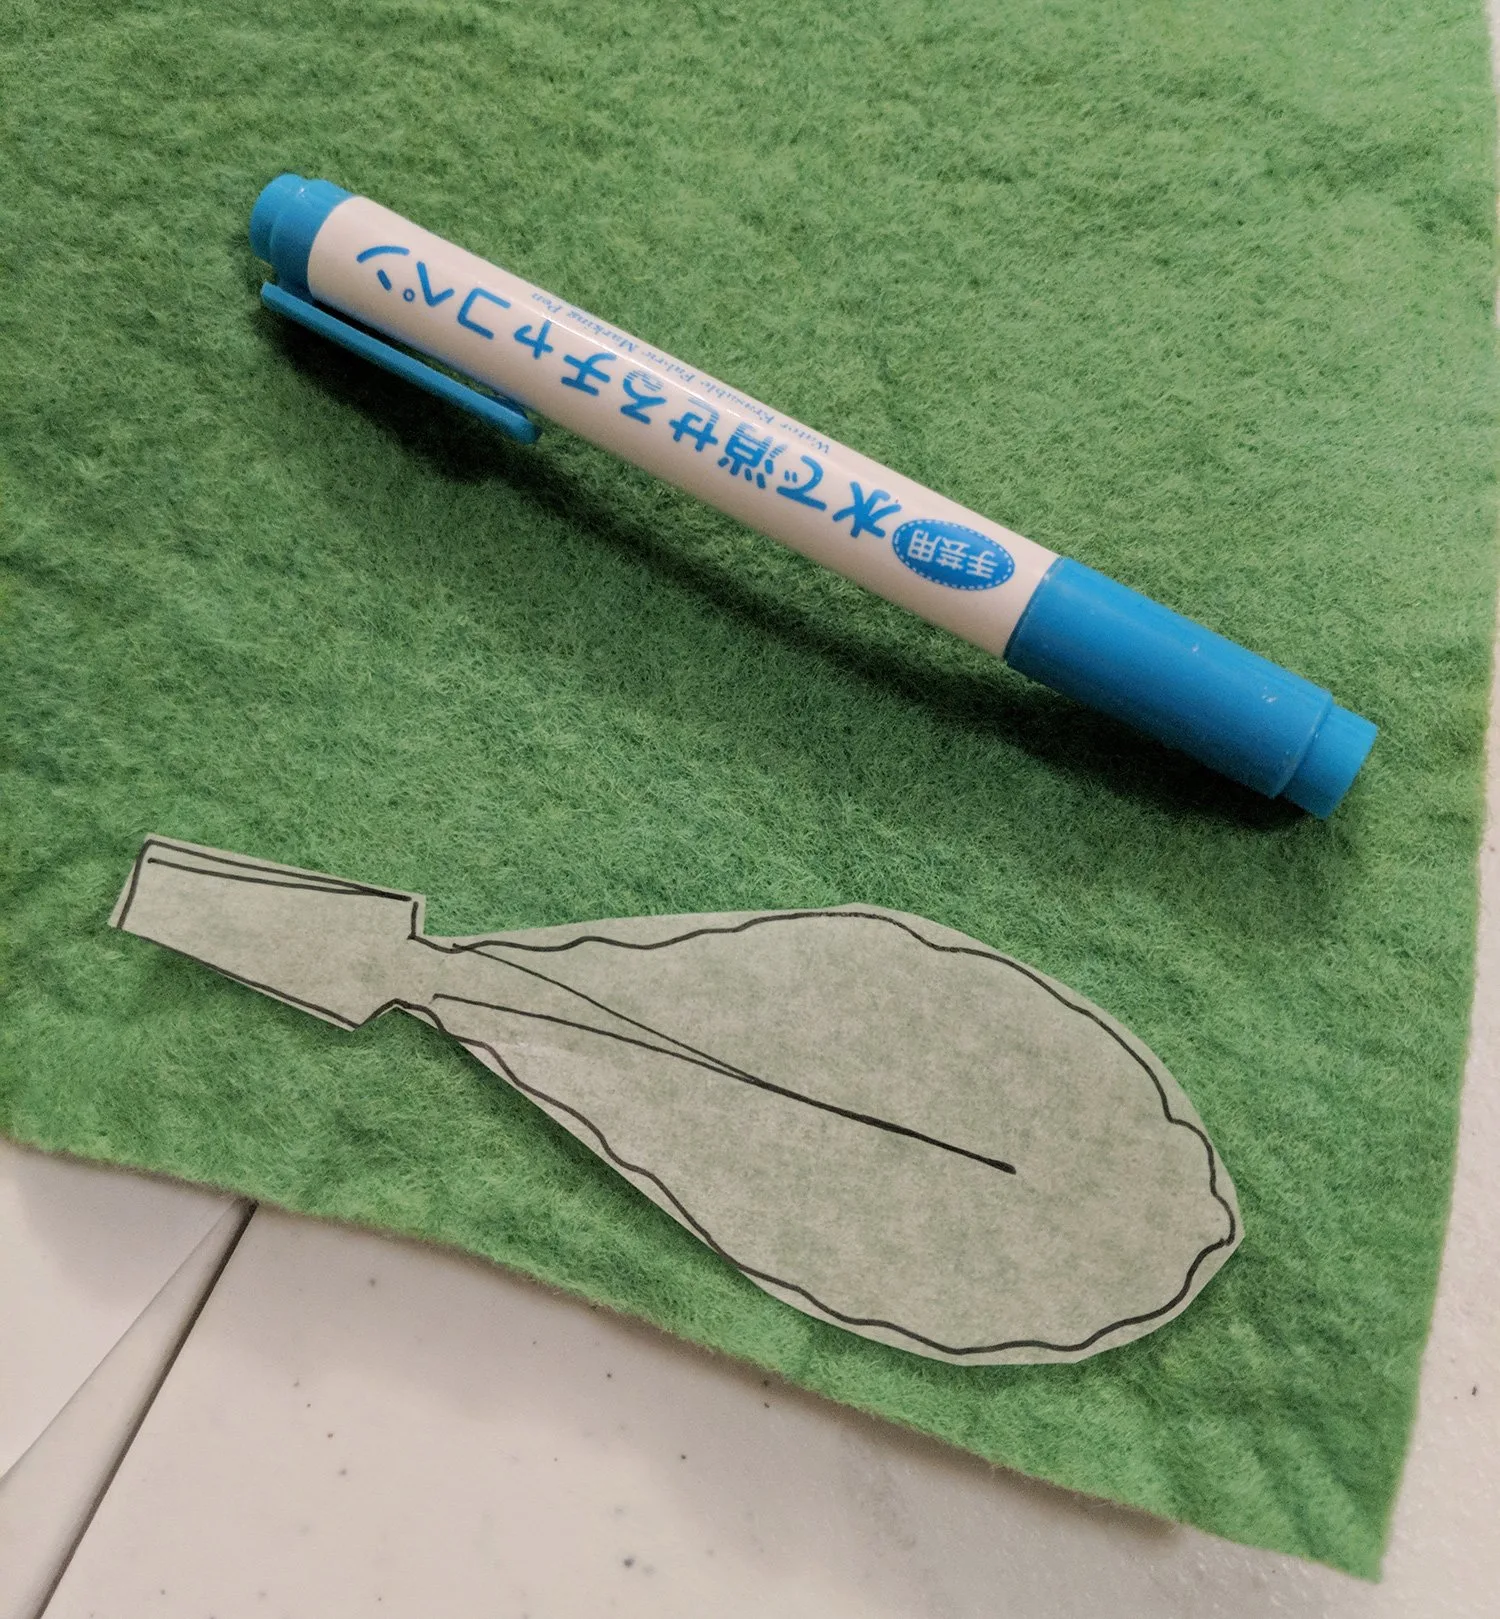 Transfer the pattern onto the stiffened felt using a fabric marker that erases easily